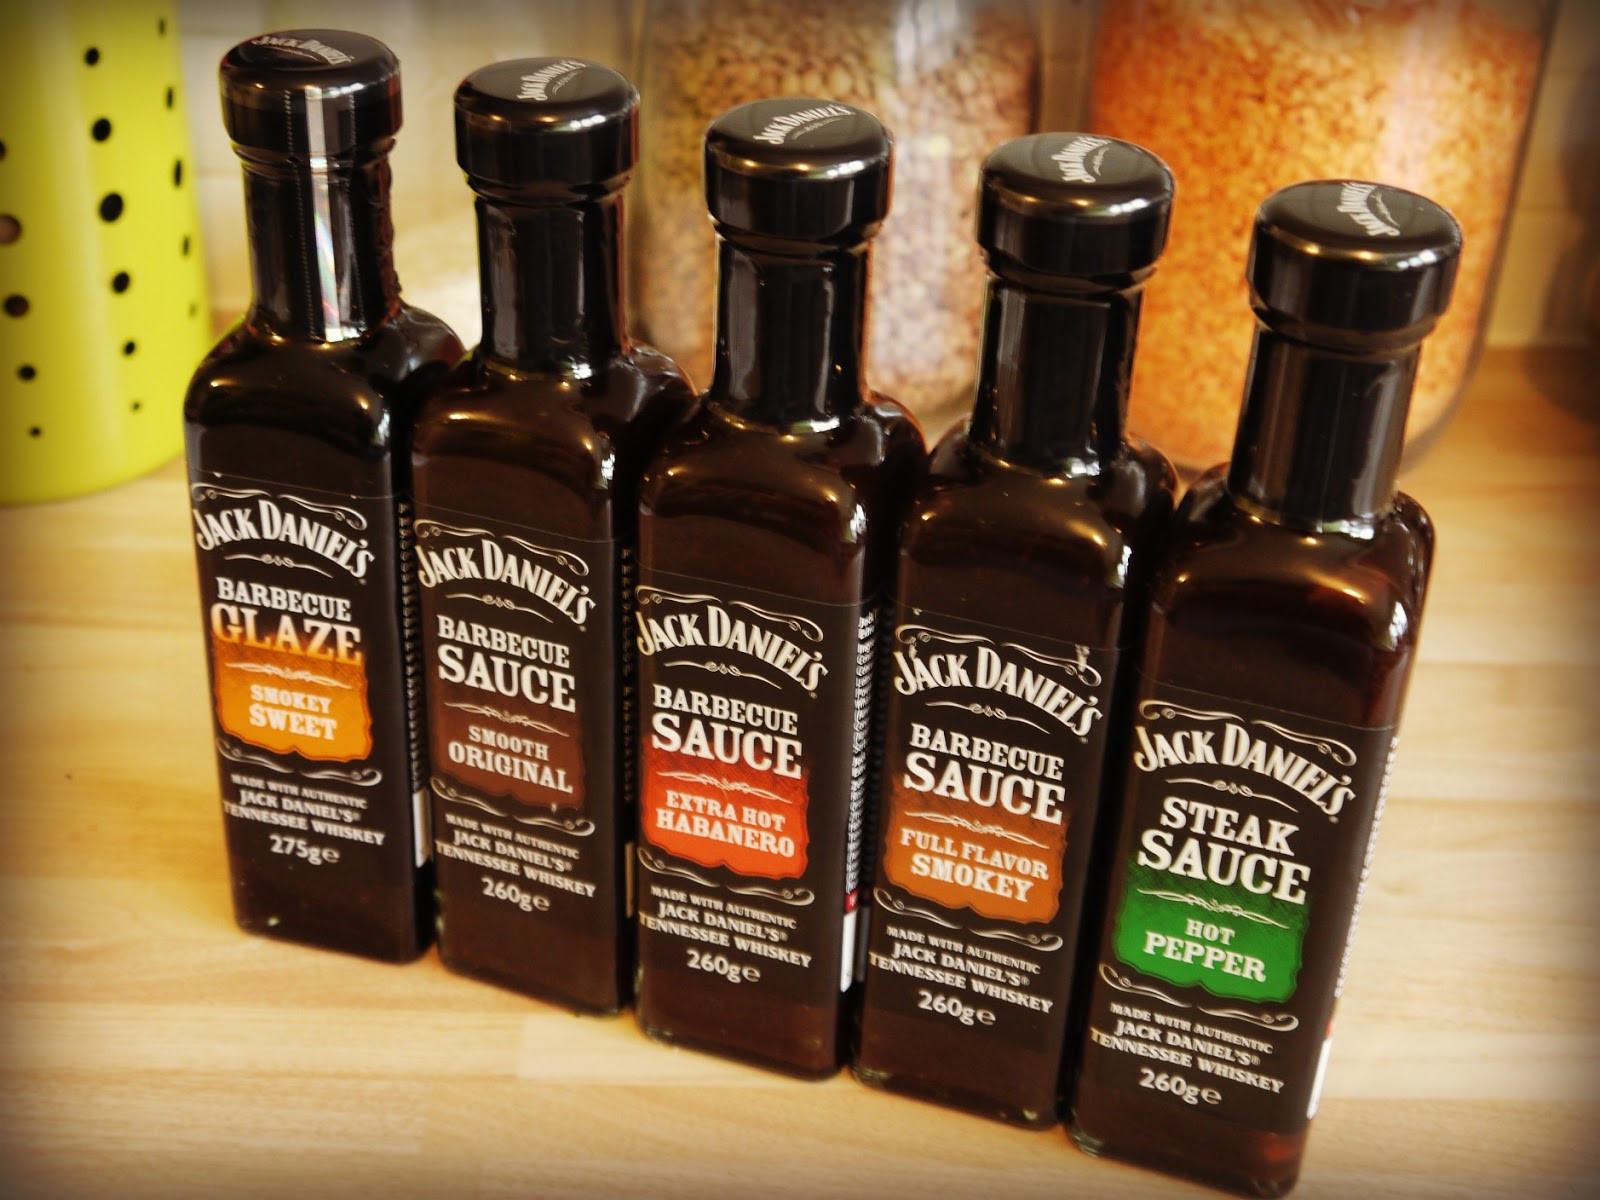 Jack Daniels Barbecue Sauces
 Inside the Wendy House Jack Daniel s Barbecue Sauces vegan